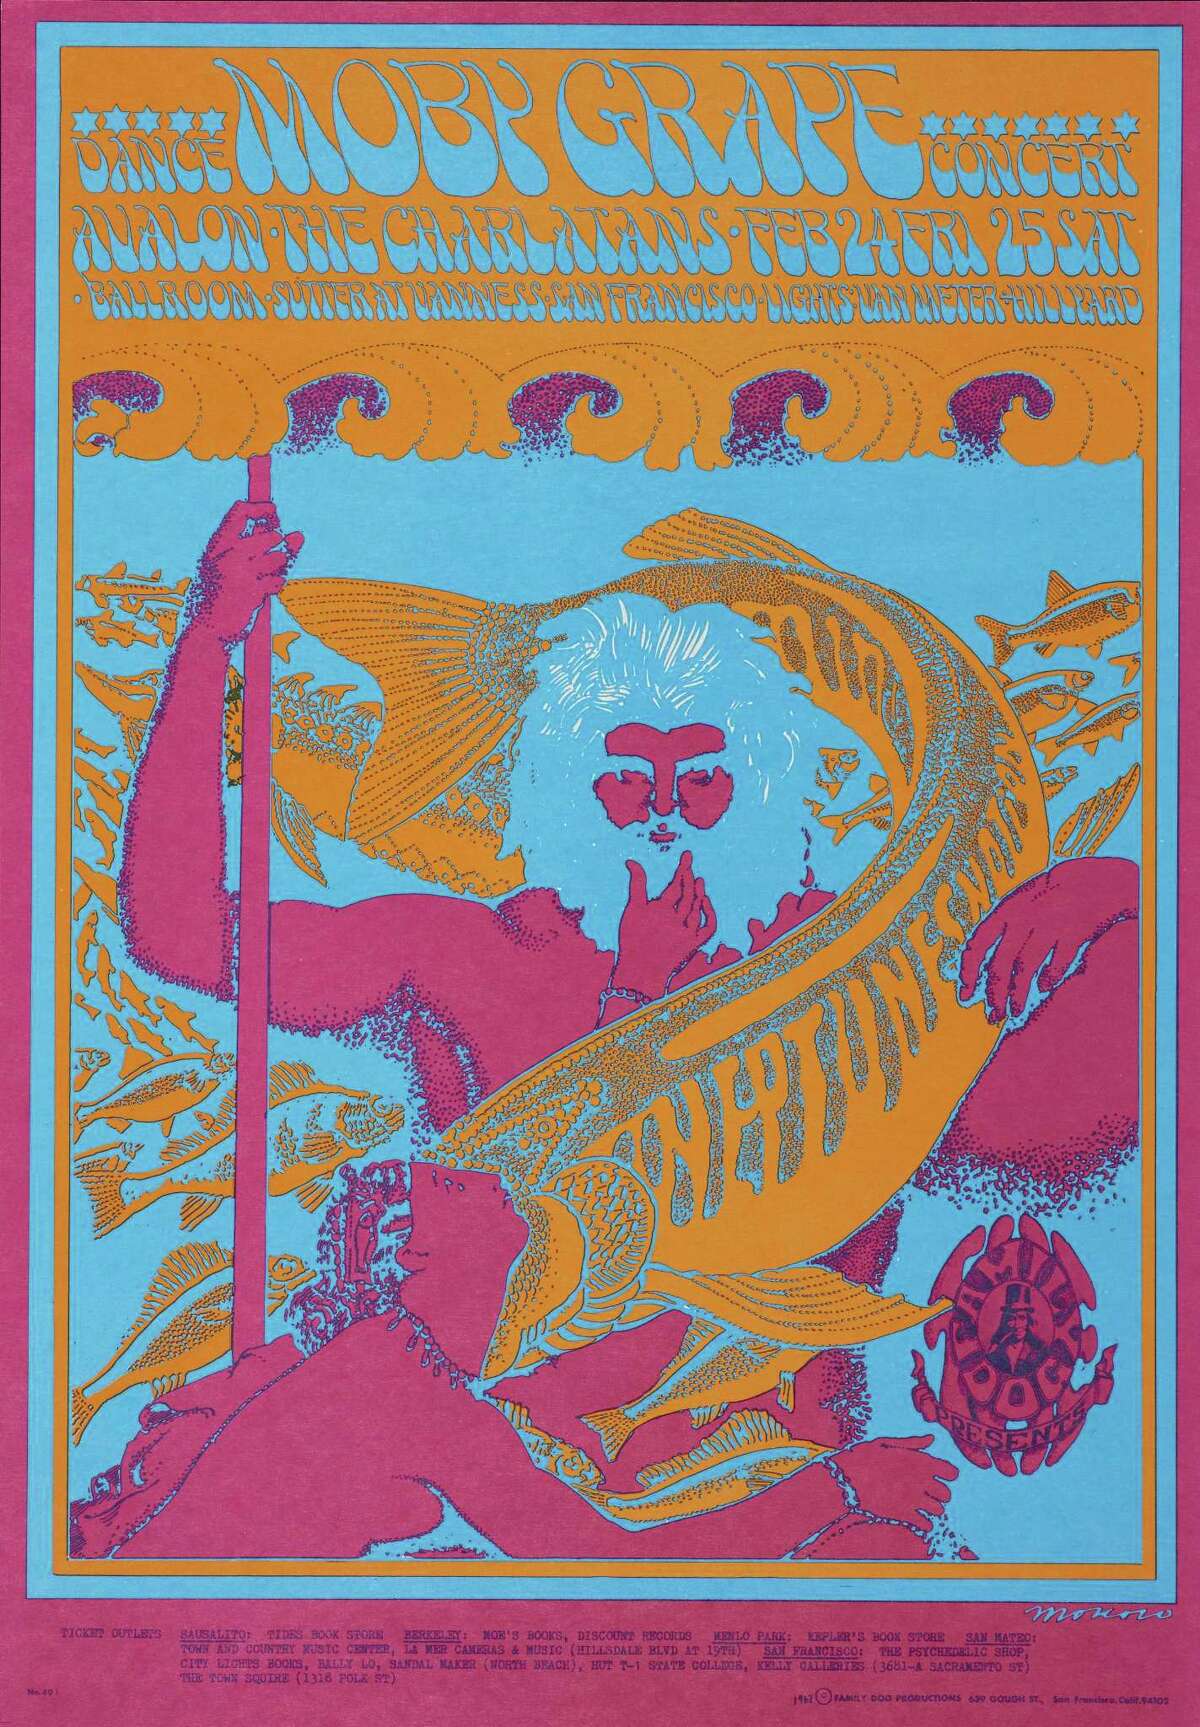 Victor Moscoso, "'Neptune's Notions,' Moby Grape, The Charlatans, February 24 & 25, Avalon Ballroom" (1967). Color offset lithograph poster. © Rhino Entertainment Company. On view at de Young Museum, Summer of Love: Art, Fashion, and Rock & Roll, April 8 - Aug. 20, 2017 Image Courtesy of the Fine Arts Museums of San Francisco